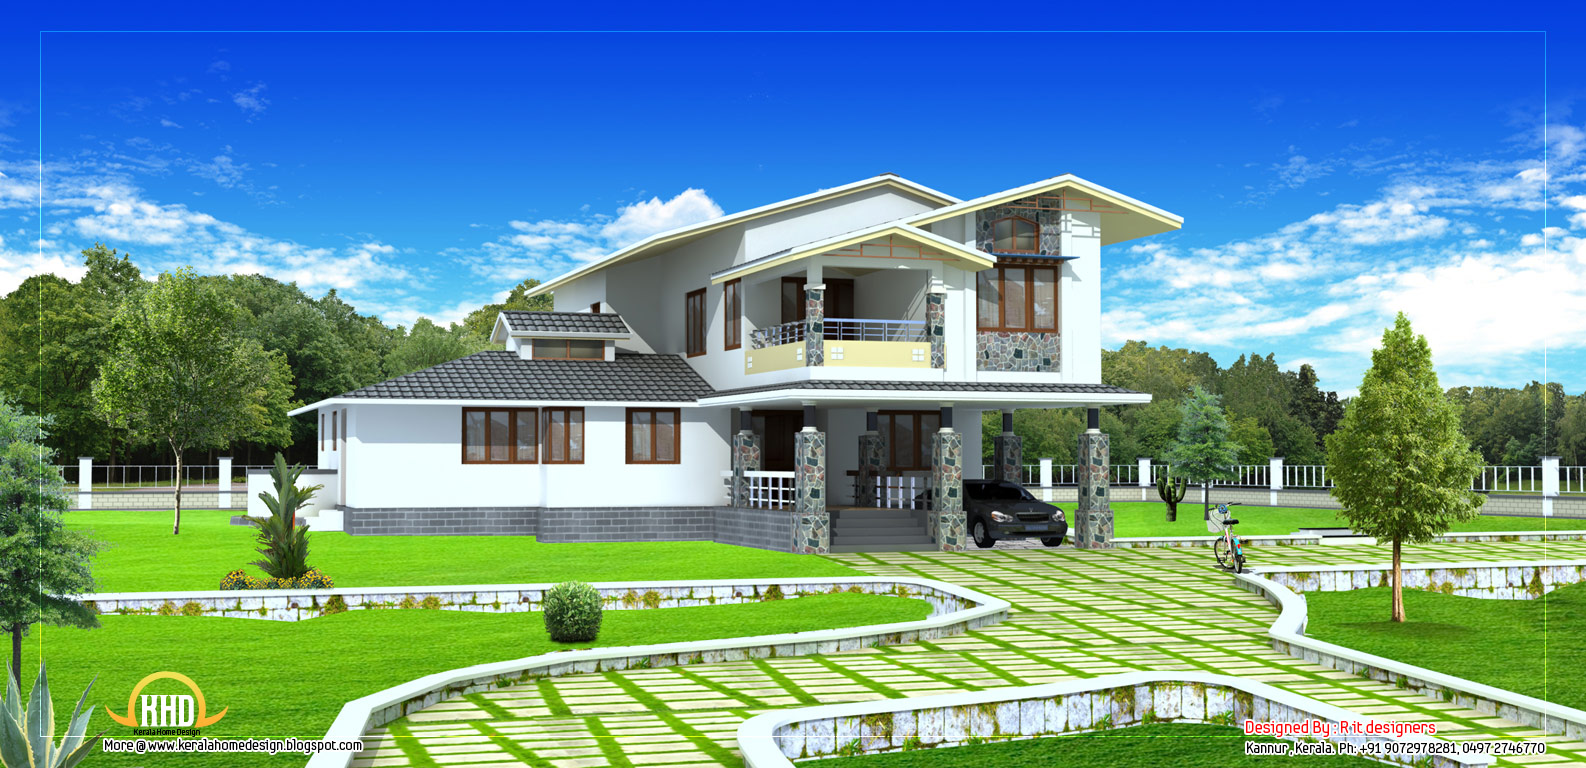  2  Story  house  plan  2490 Sq Ft home  appliance